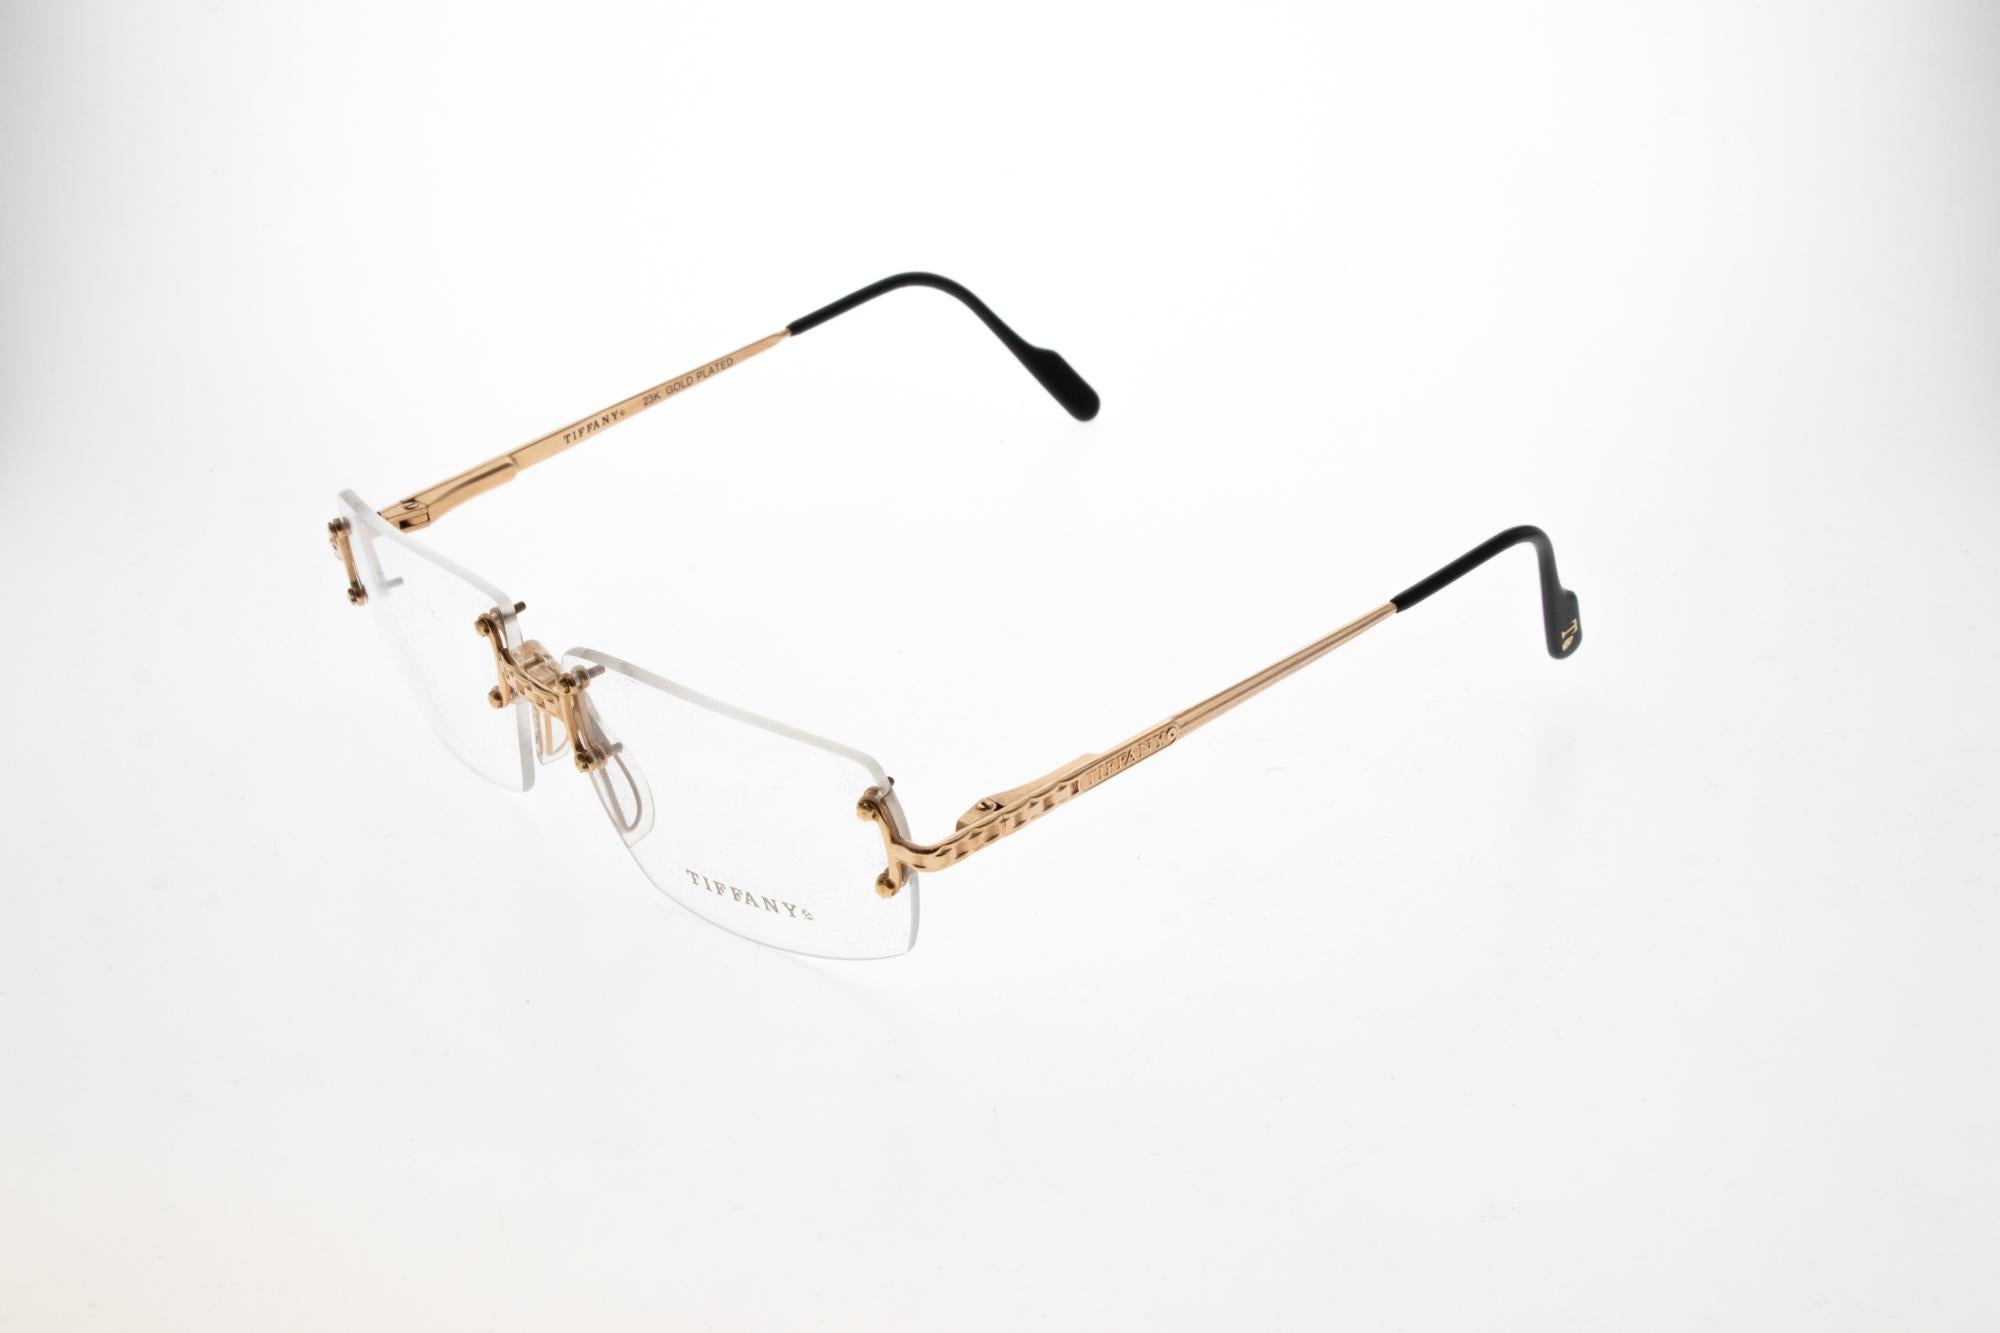 Original 1990’s Tiffany & Co T100 gold plated rimless frames. Tiffany & Co was founded in 1837 by Charles Lewis Tiffany, with it’s flagship store located on Fifth Avenue New York. Tiffany set the standard for sterling silver jewellery, demonstrating